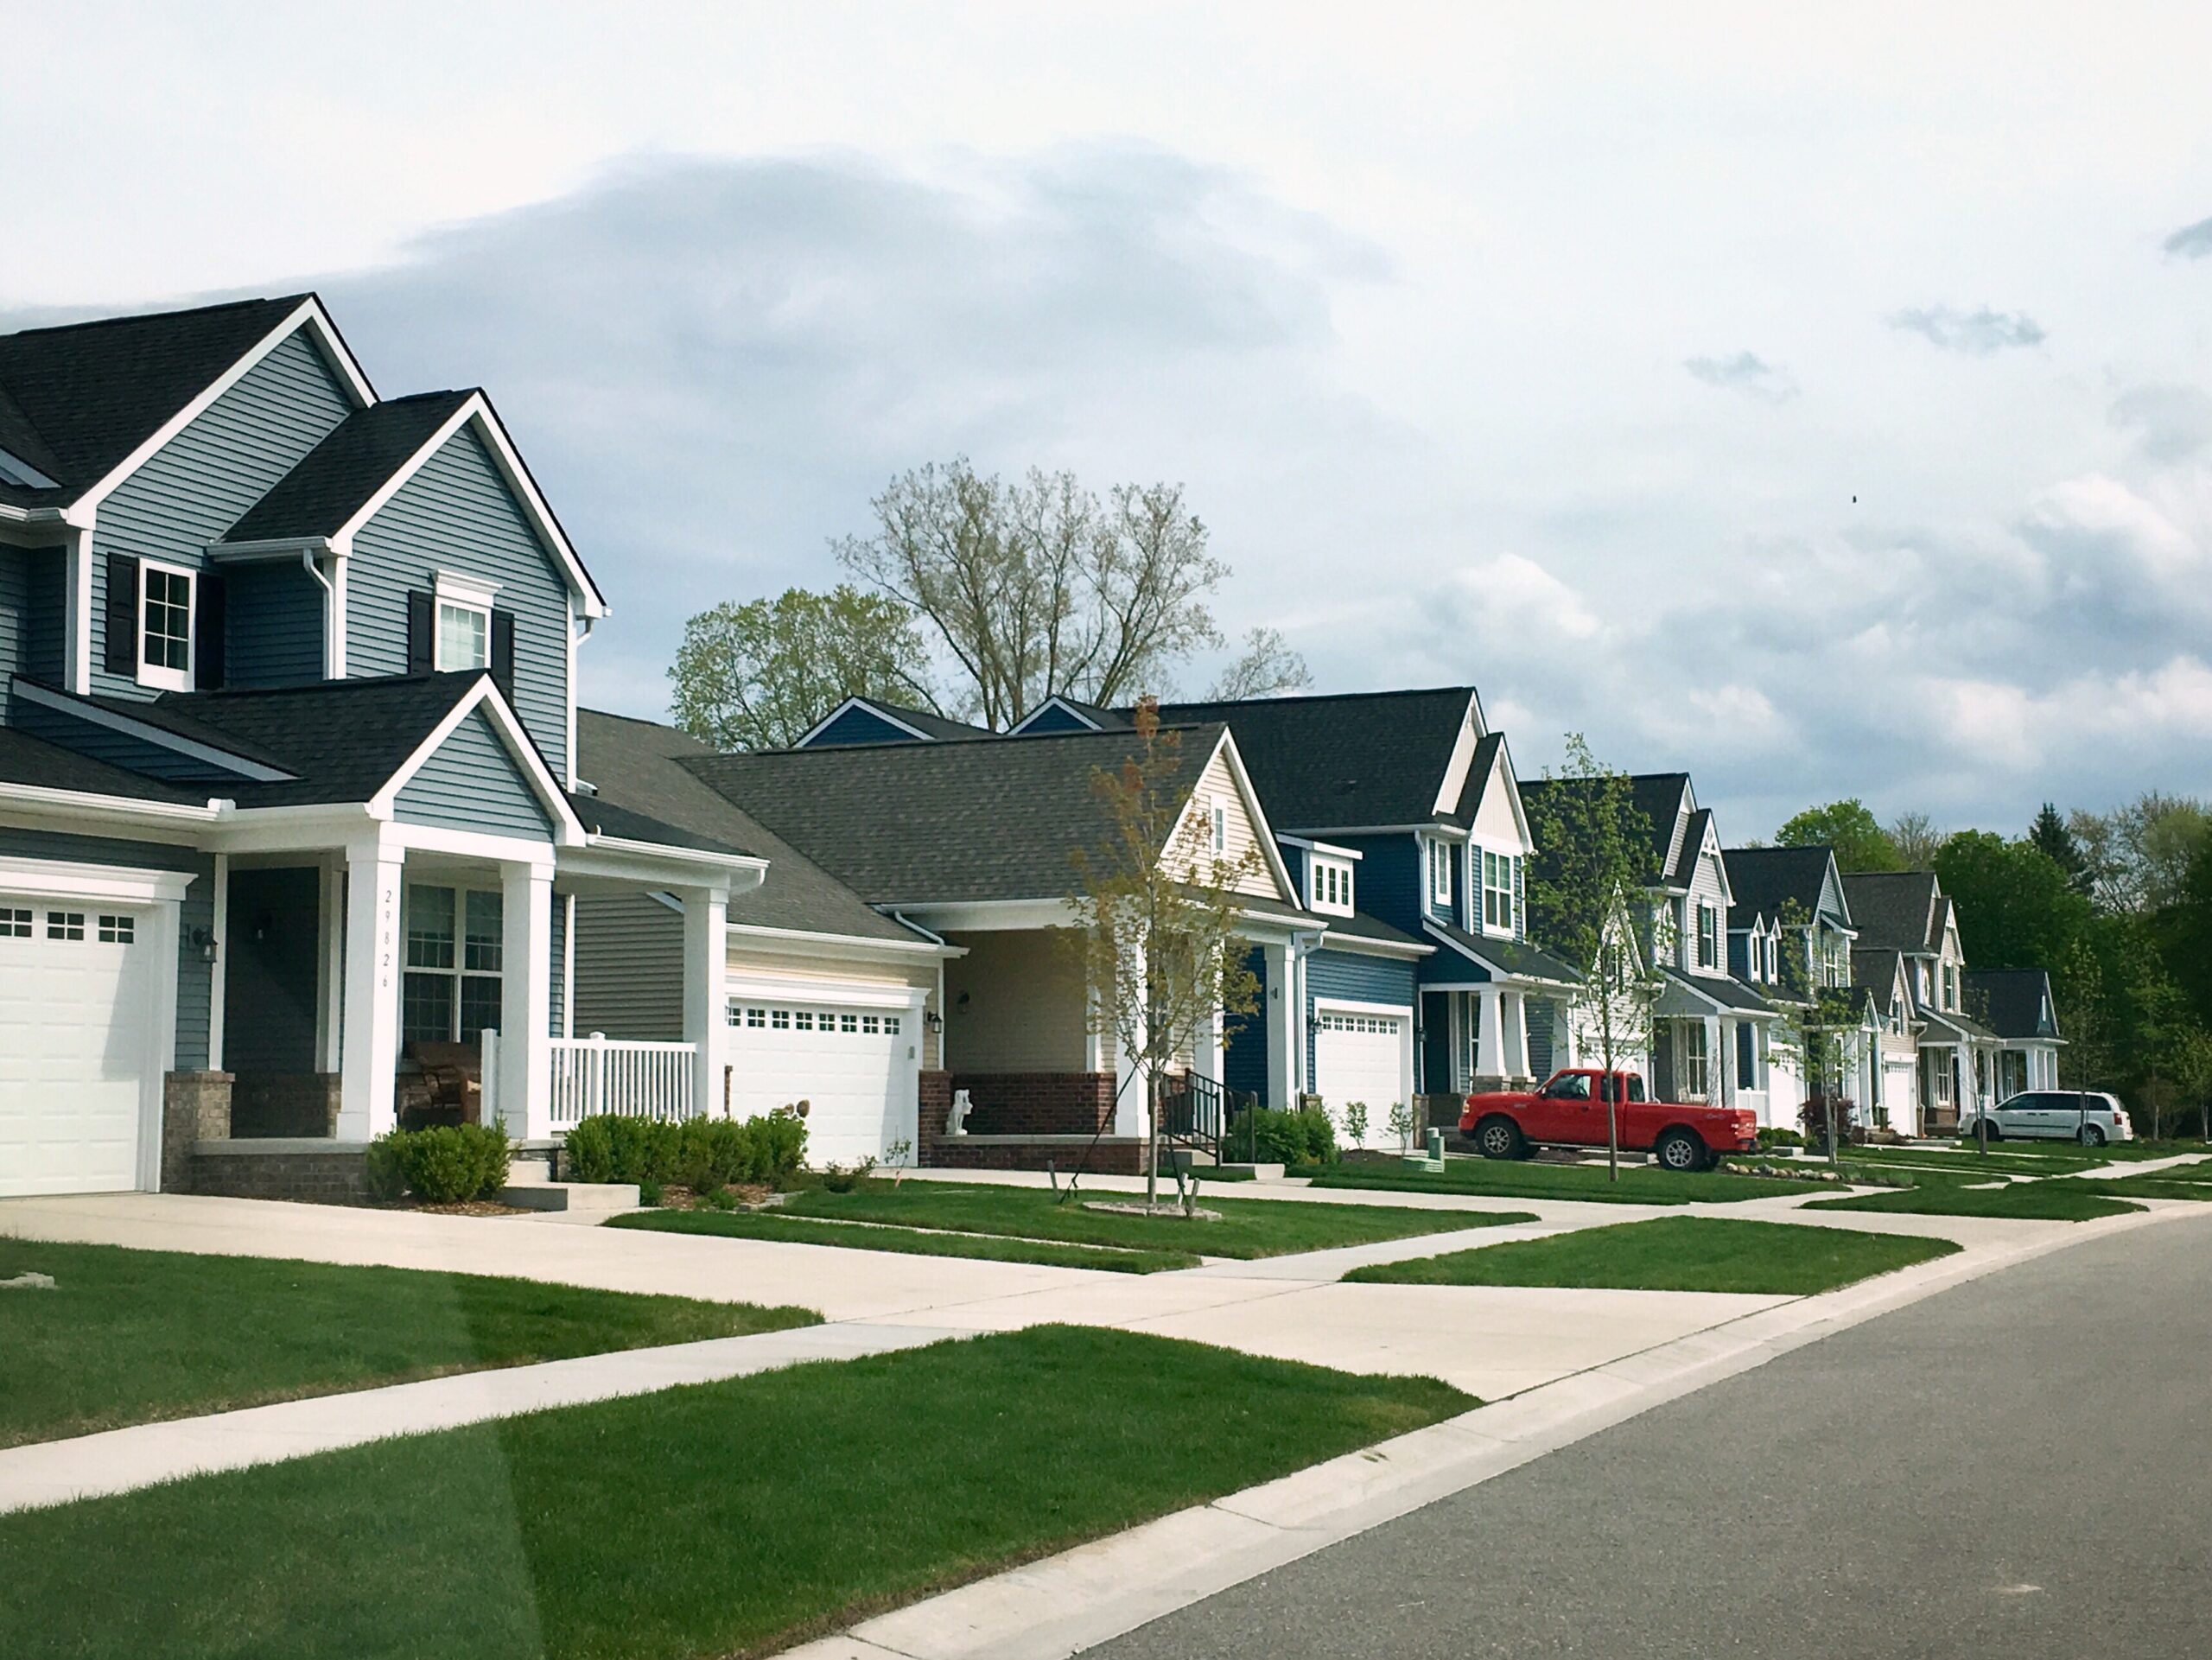 5 Signs of a Great Neighborhood > GoPrime